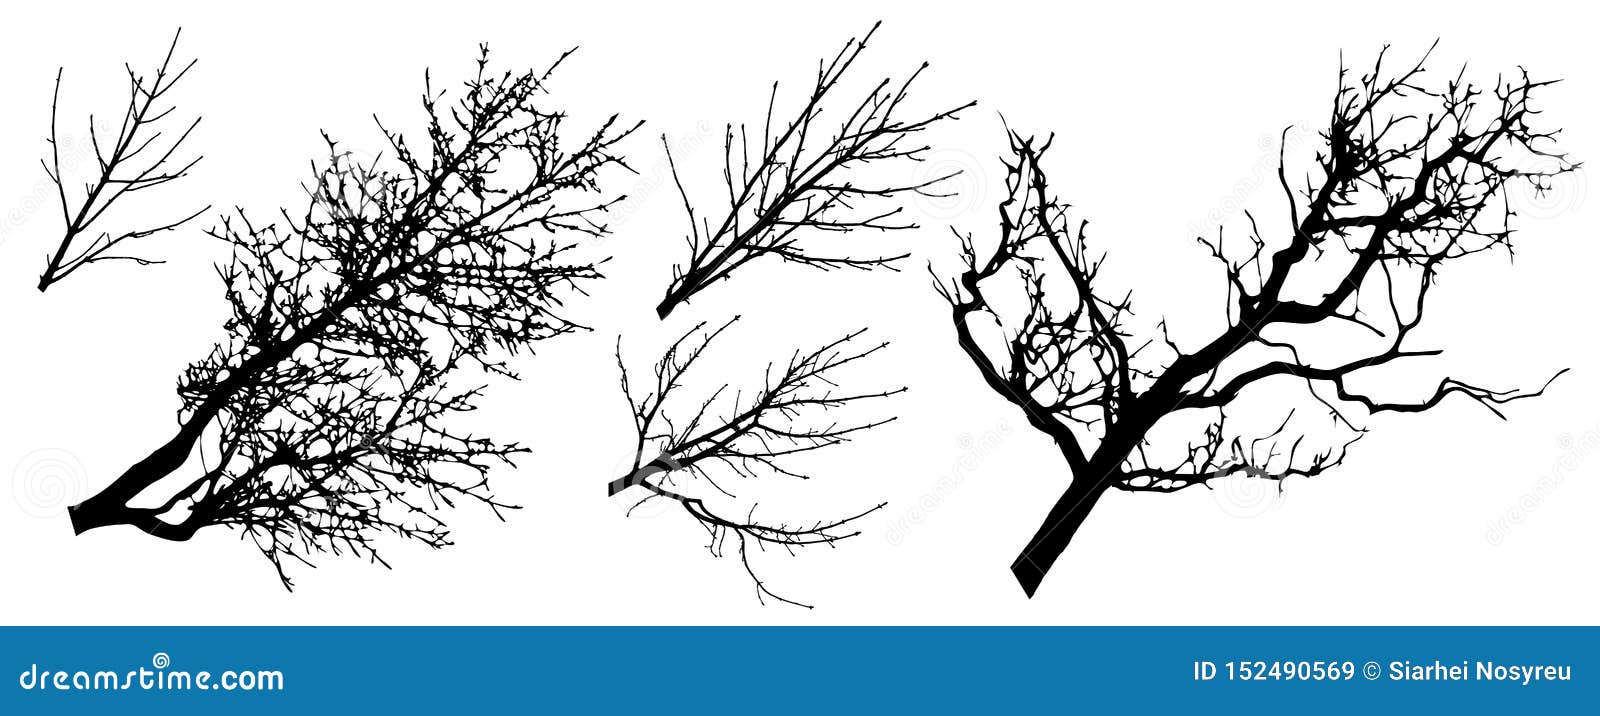 set of tree branches silhouettes,  